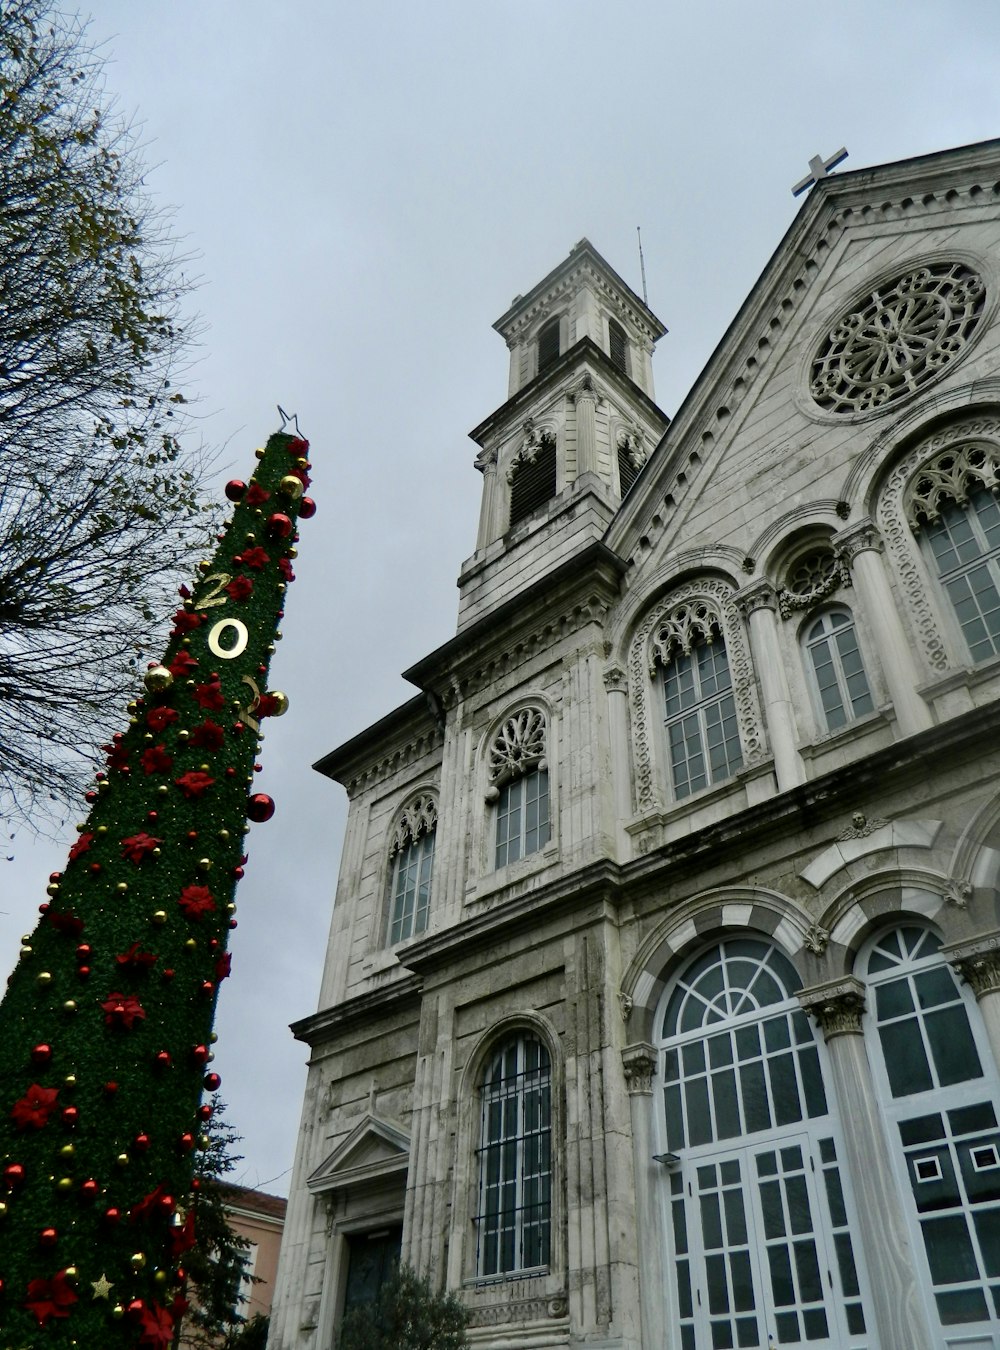 a building with a tower and decorations